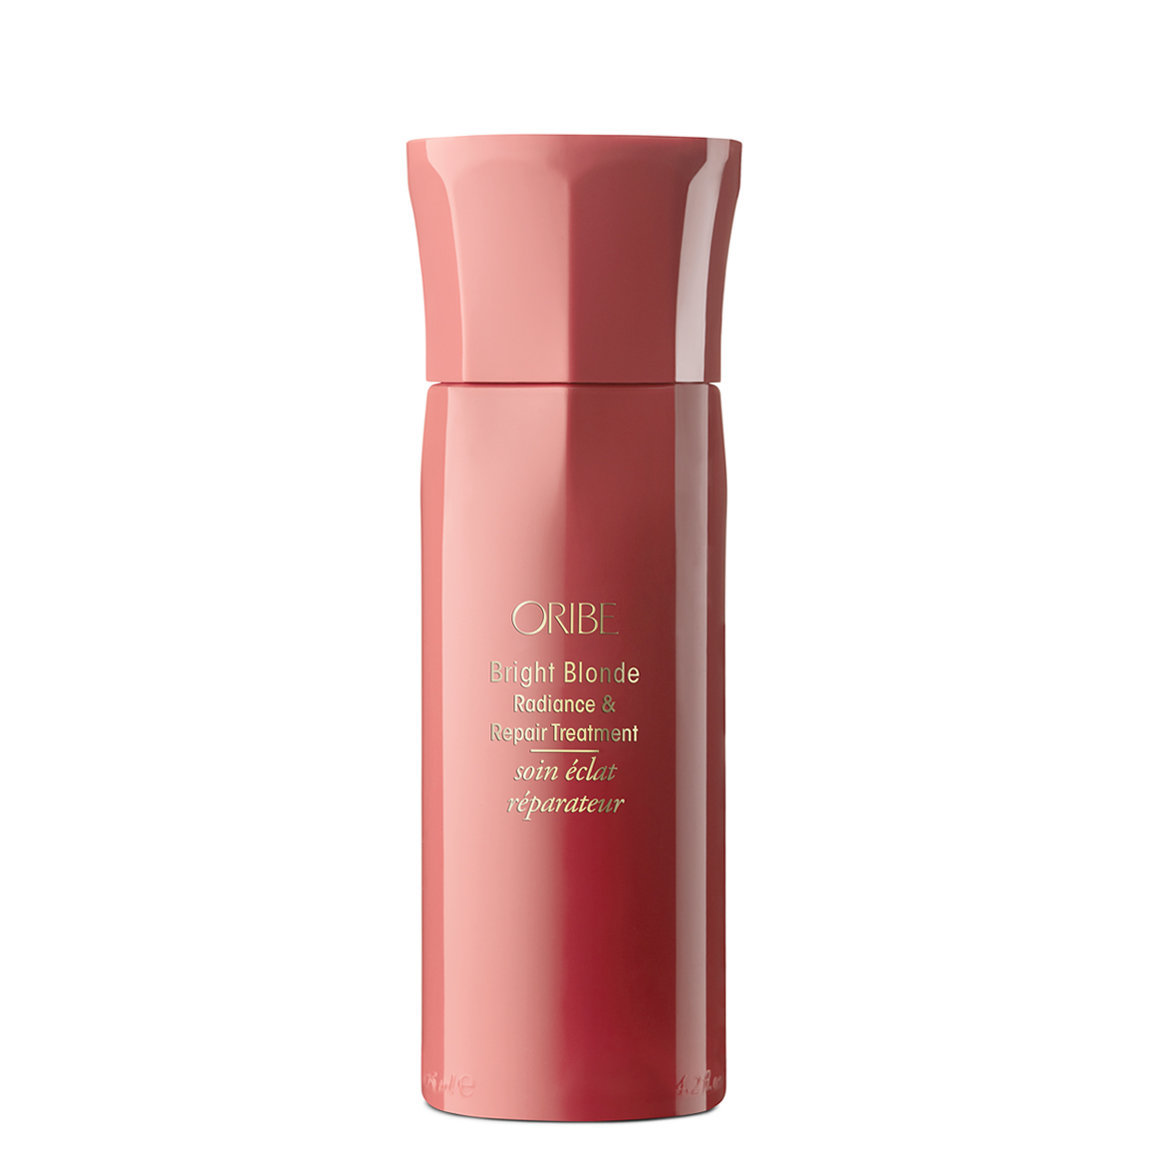 Oribe Bright Blonde Radiance & Repair Treatment alternative view 1 - product swatch.